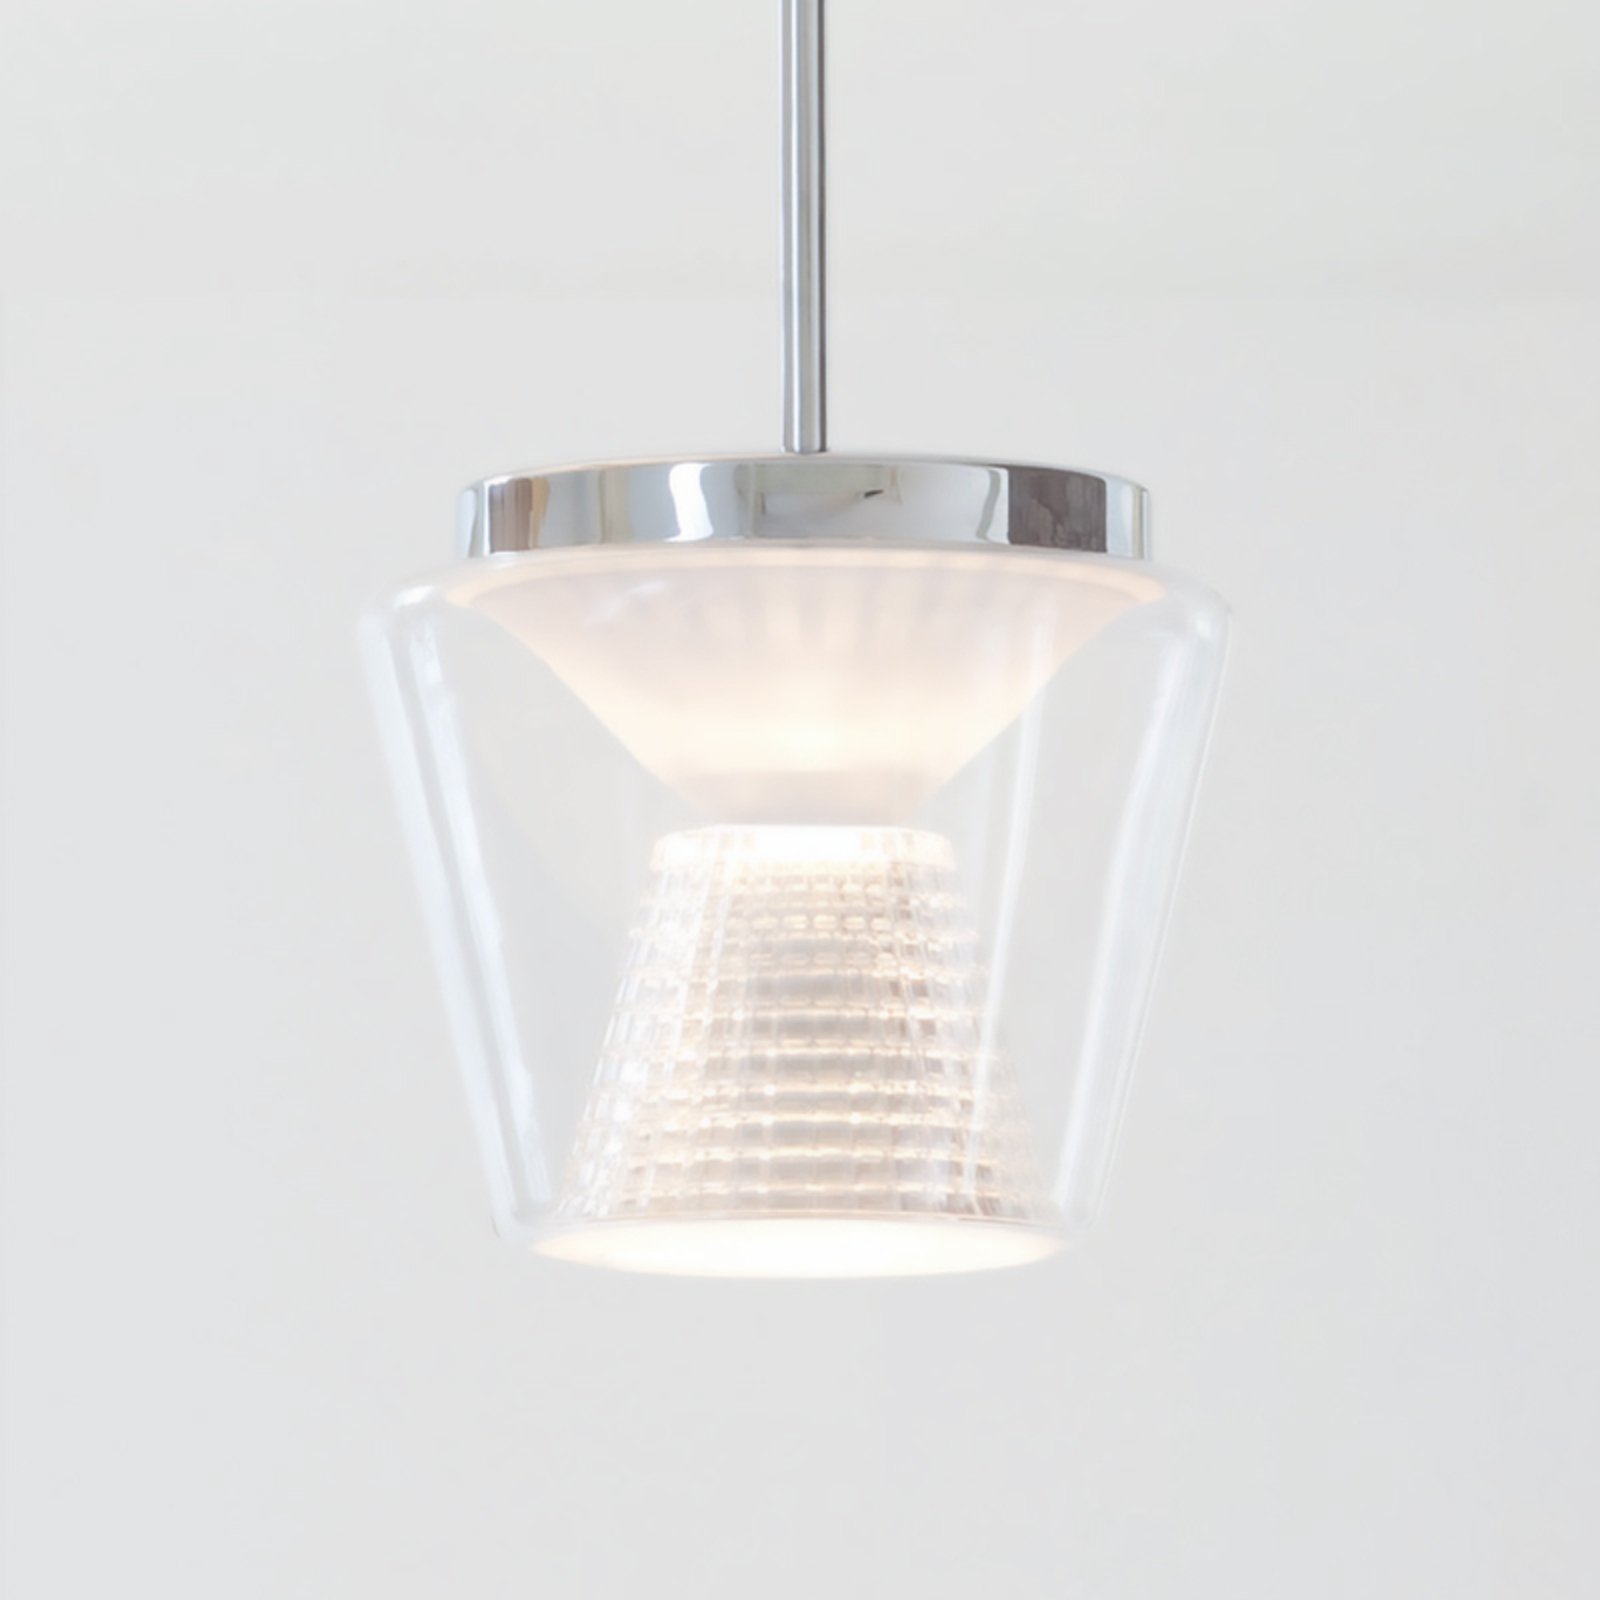 With crystal glass - LED pendant light Annex